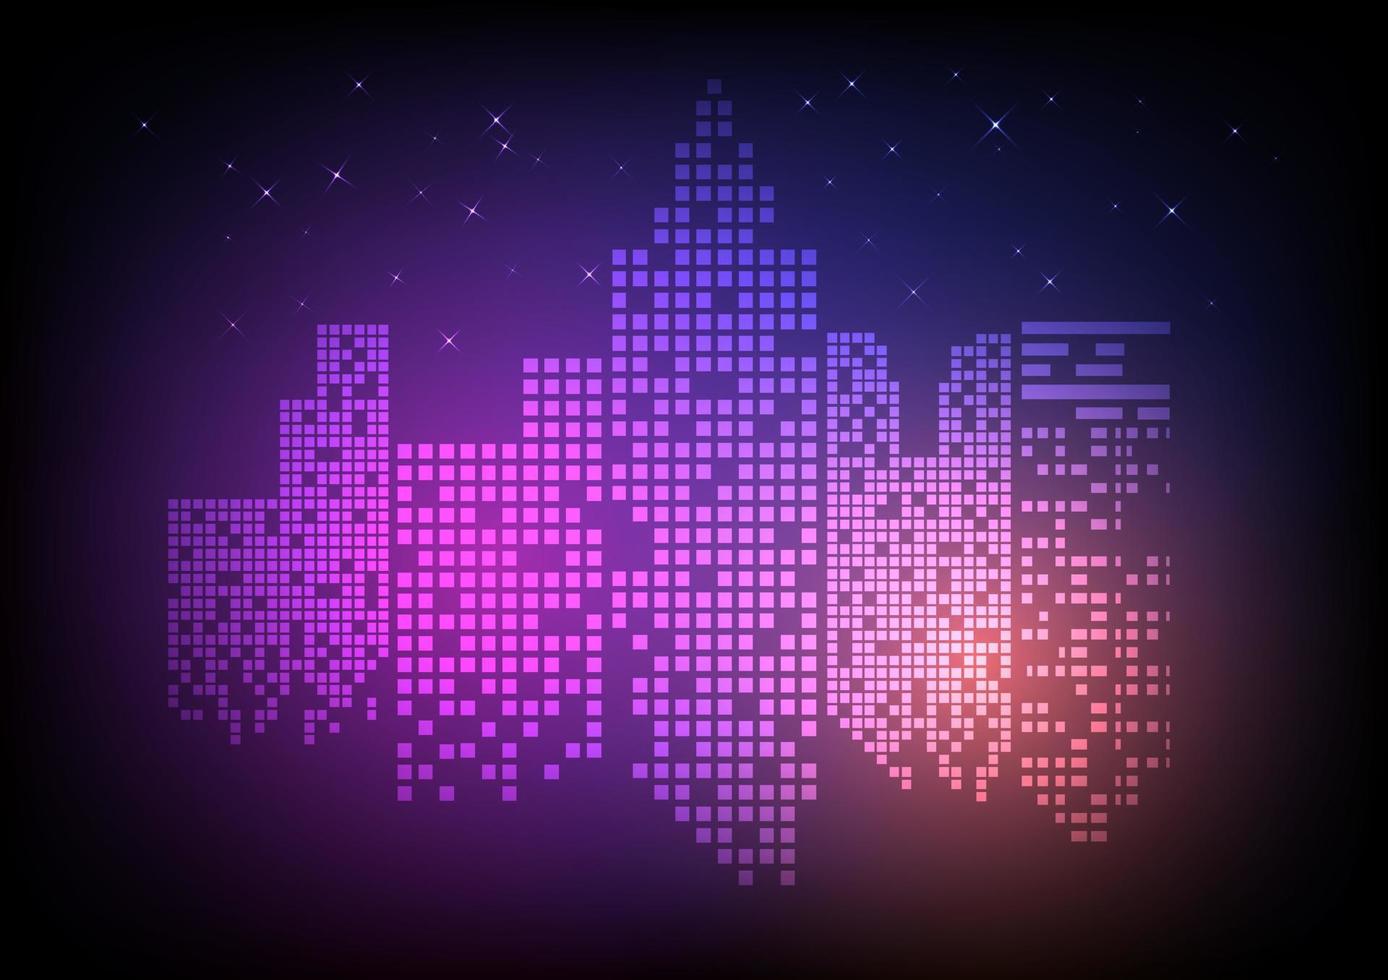 abstract background technology future city The digital building is illuminated. orange with pink and The stars that shine in the sky On a dark blue gradient background vector